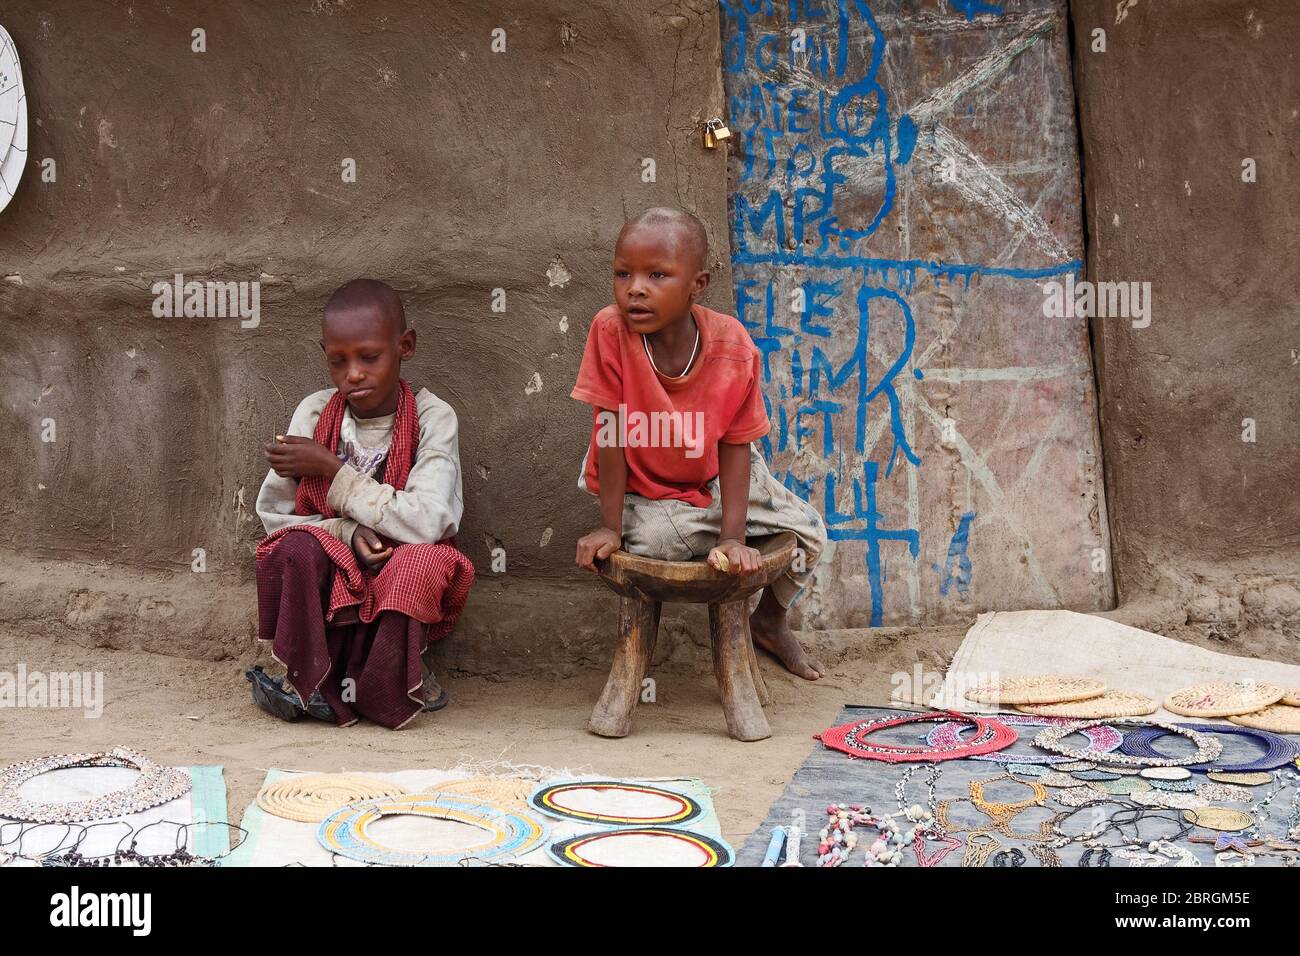 two Maasai children, boys, selling beaded items, traditional round mud house, tribal village, dirty clothes, Tanzania; Africa Stock Photo